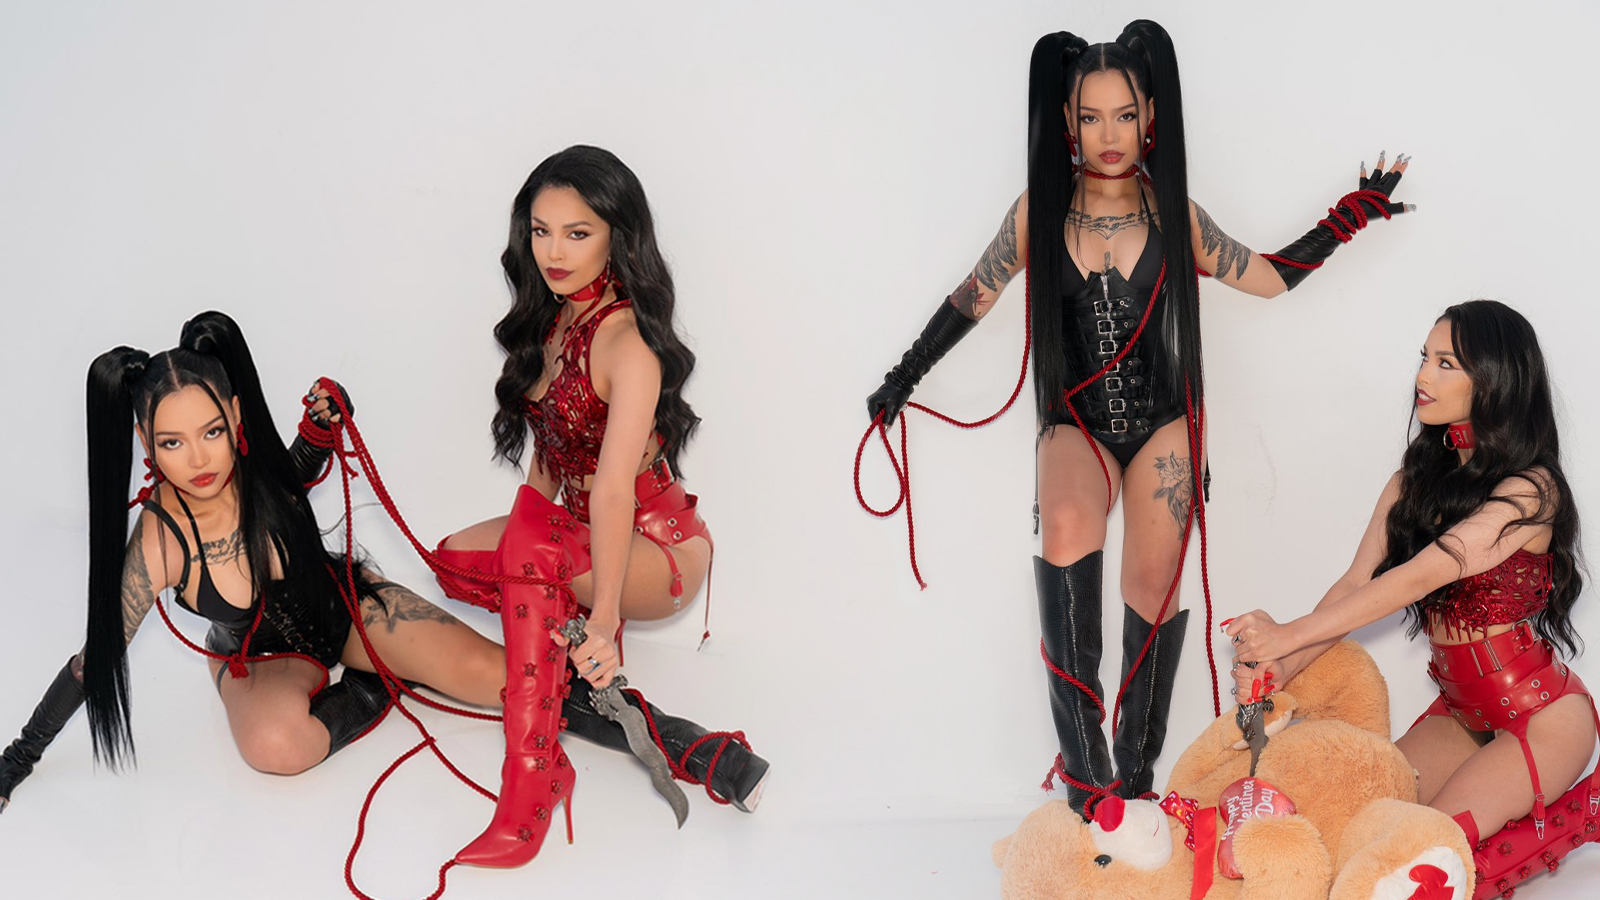 Valkyrae And Bella Poarch Send Fans Wild With Valentine's Photoshoot.